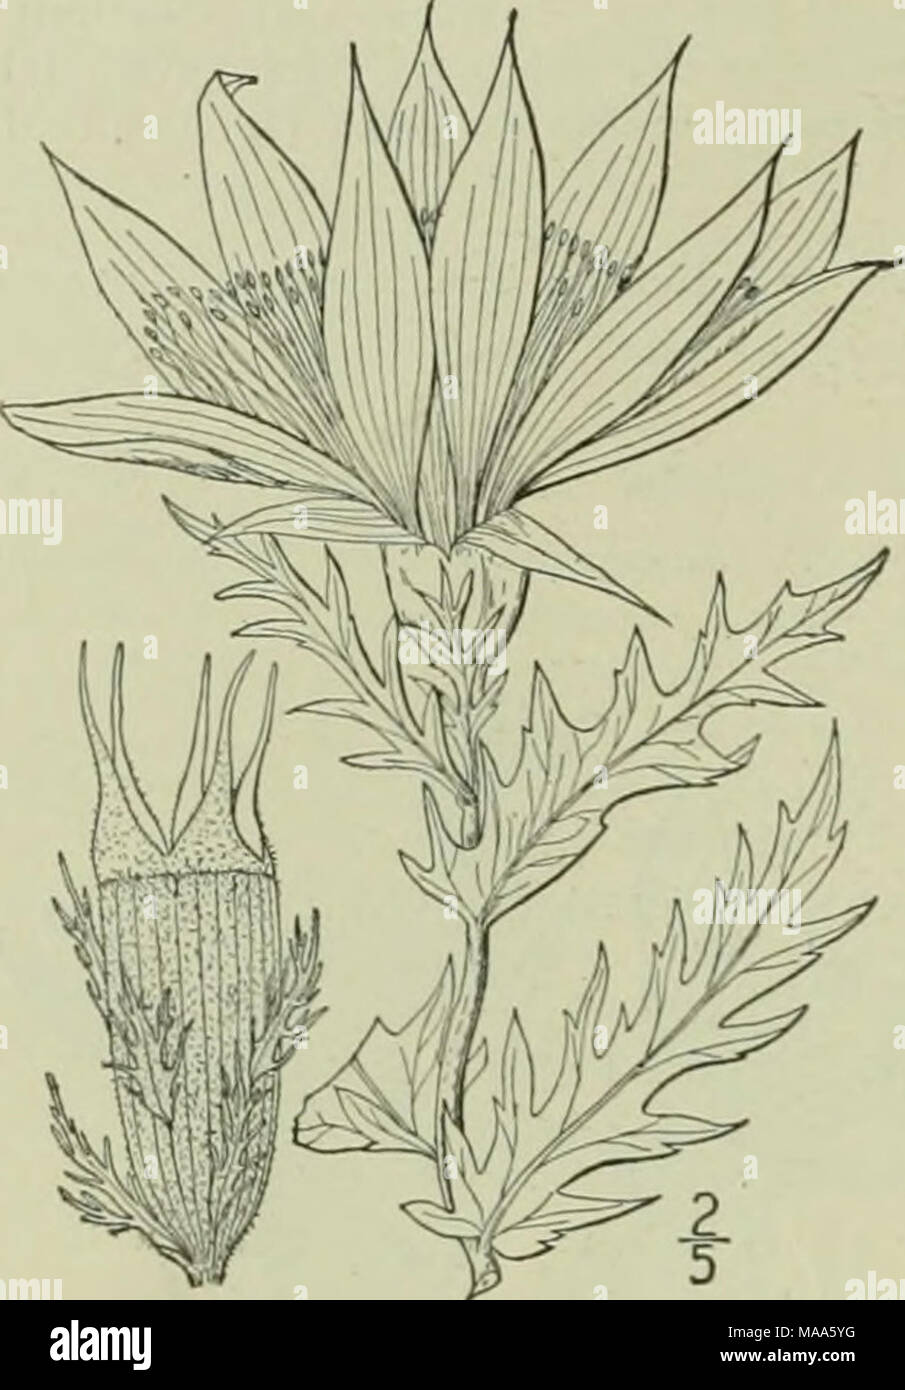 . An illustrated flora of the northern United States, Canada and the British possessions : from Newfoundland to the parallel of the southern boundary of Virginia and from the Atlantic Ocean westward to the 102nd meridian . 3. Nuttallia decapetala (Pursh) Greene. Prairie-lil3^ Showy Alentzelia. Fig. 2980. Bartonia decapetala Pursh, in Bot. Mag. pi. 1487. 1812. Barlonia ornata Pursh. Fl. Am. Sept. 327. 1814 Mentzelia ornata T. &amp; G. FI. N. A. i: 534. 1840. Mentzelia decapetala Urban &amp; Gilg, in Engl. &amp; Prantl, Nat. Pfl. Fam. 3: Abt. 6a, 111. iScj4. A^. decapetala Greene, Leaflets i: 21 Stock Photo